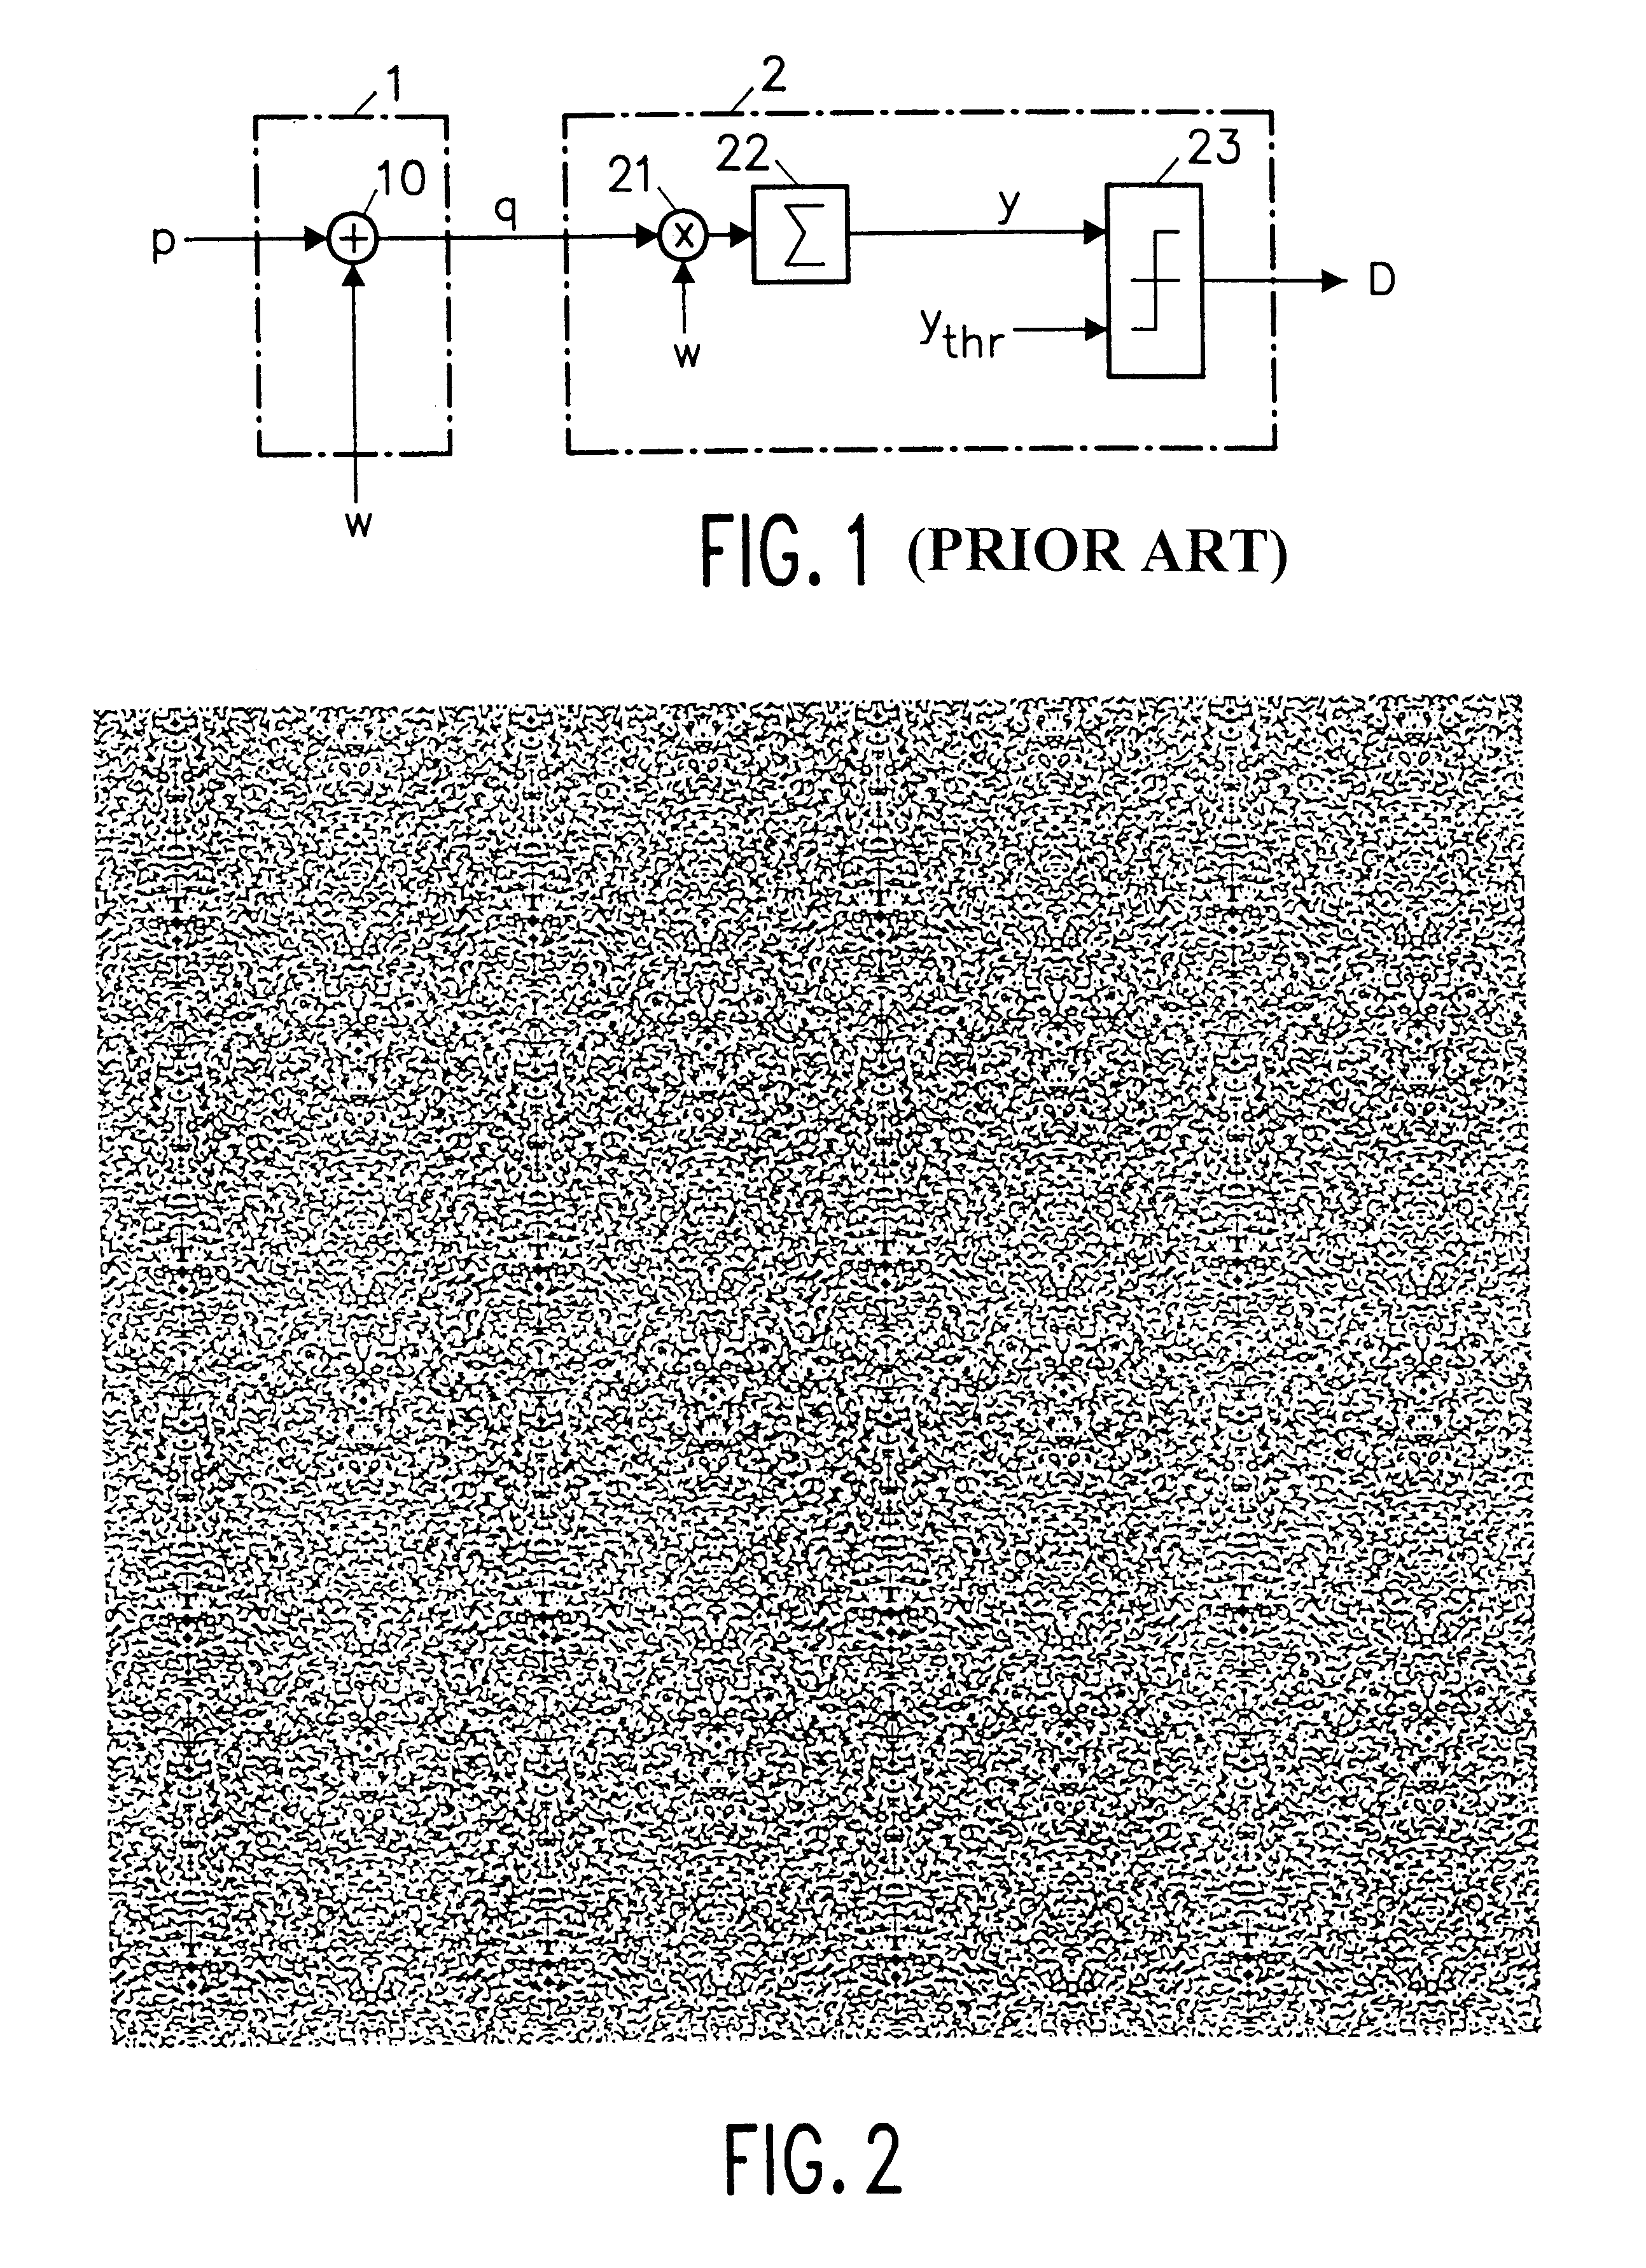 Method and arrangement for detecting a watermark using statistical characteristics of the information signal in which the watermark is embedded